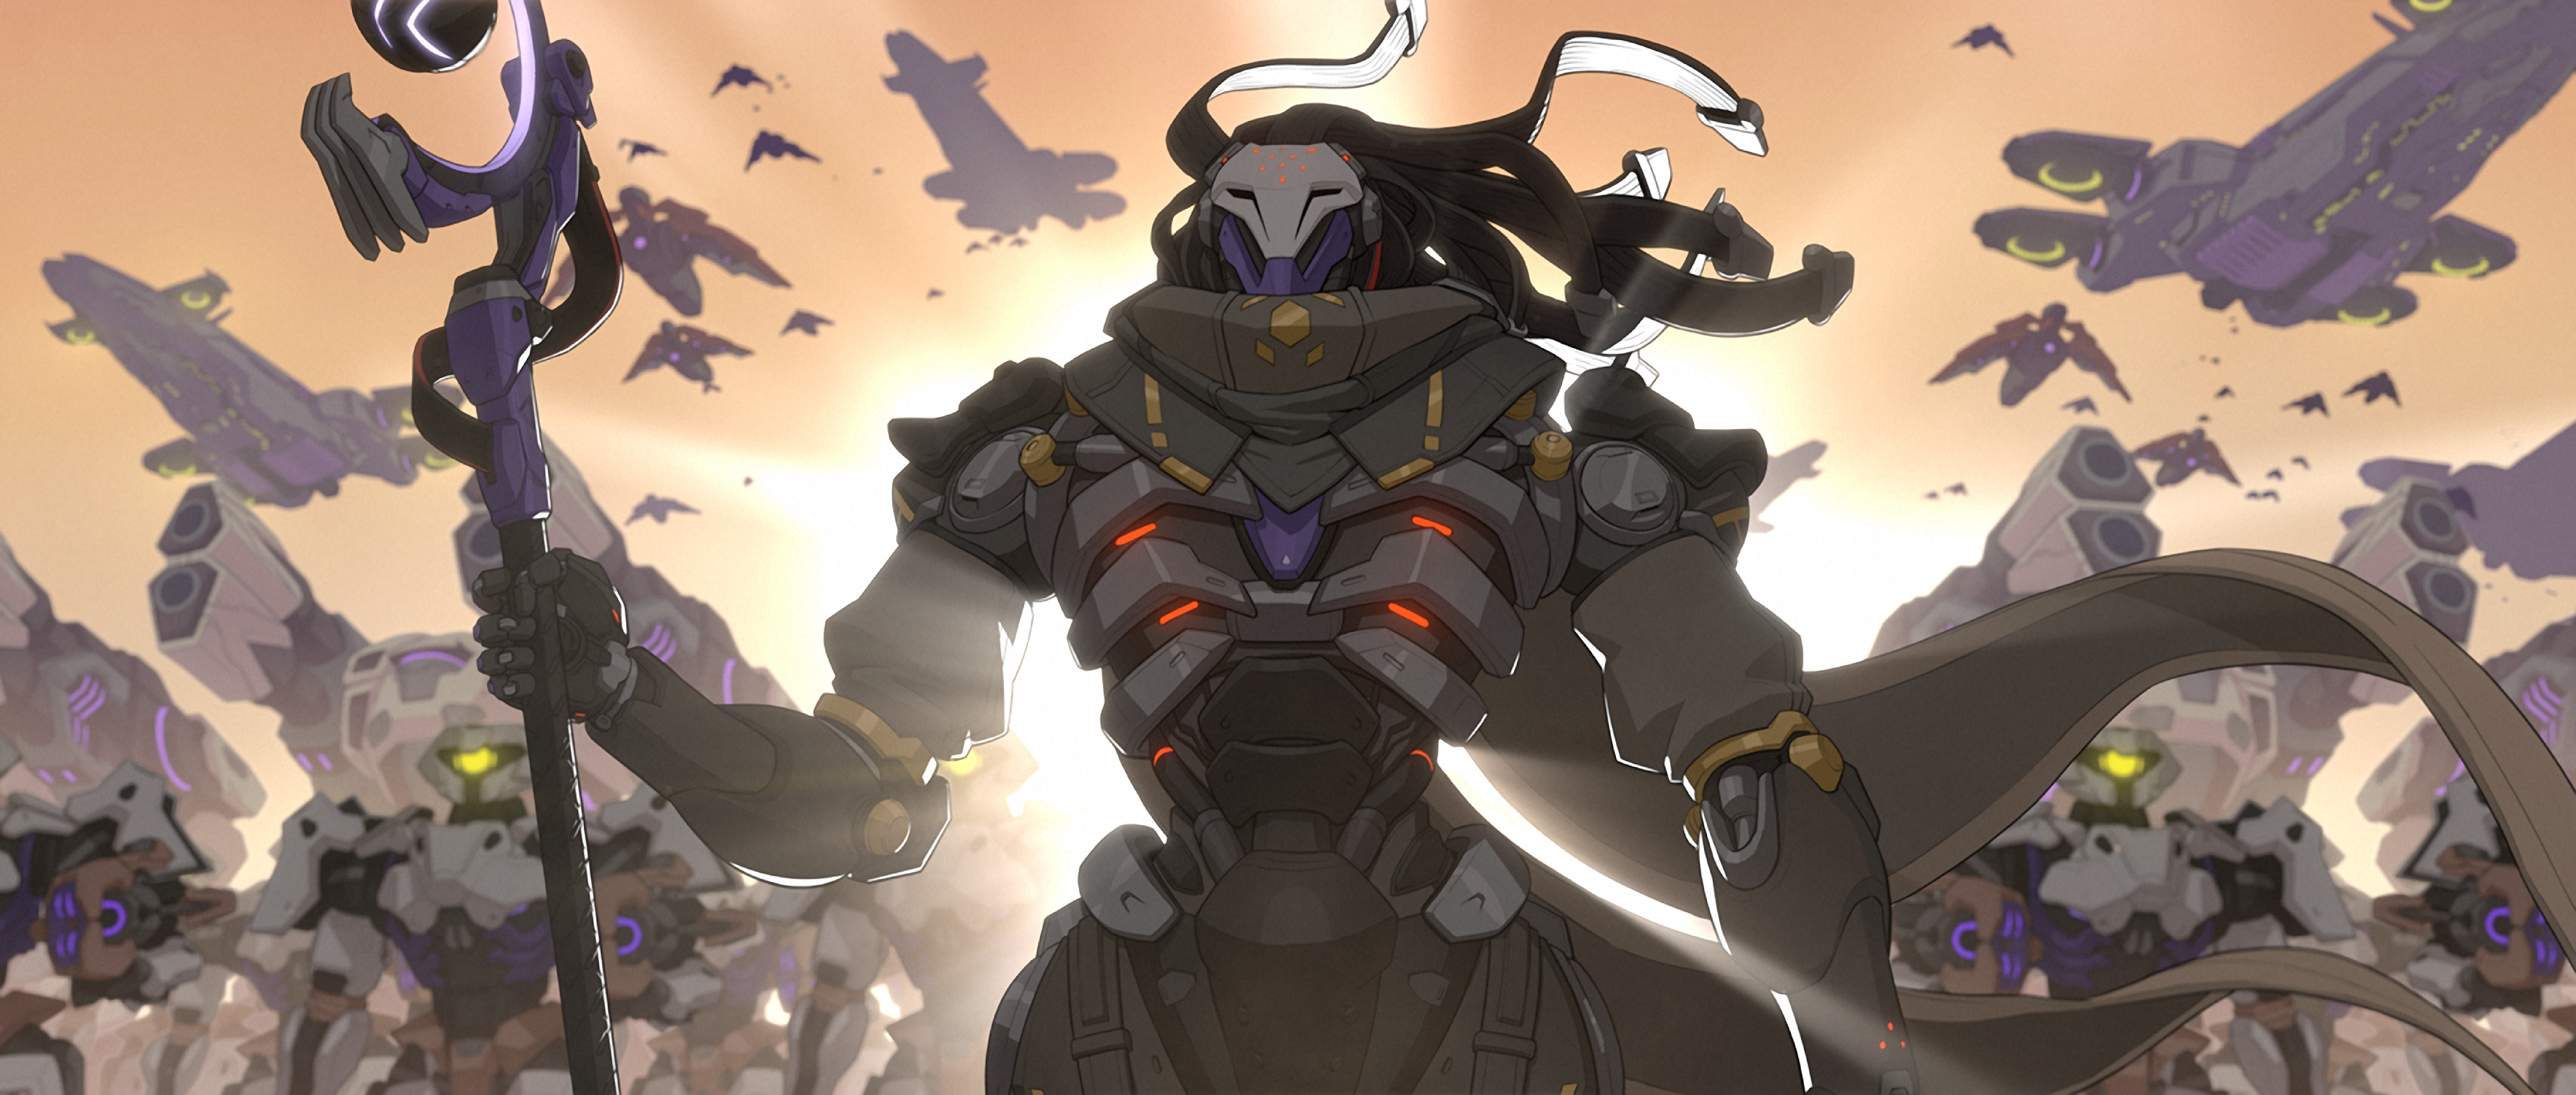 Overwatch 2 - Ramattra, leader of Null Sector, stands at the vanguard of an army of omnics.